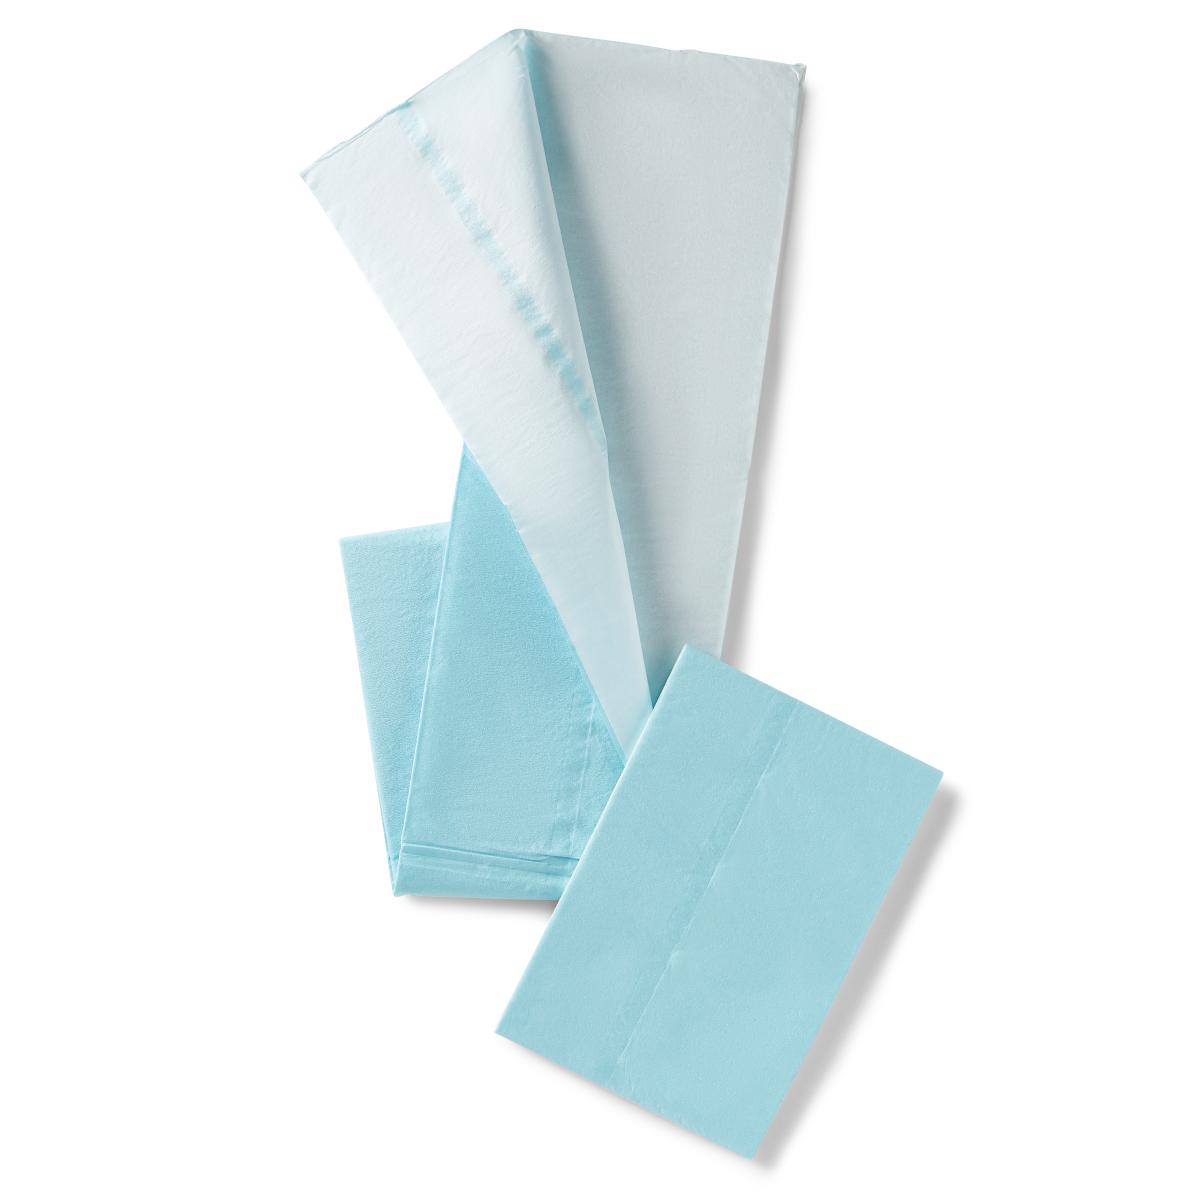 Disposable Sterile Drapes by Medline - FREE Shipping